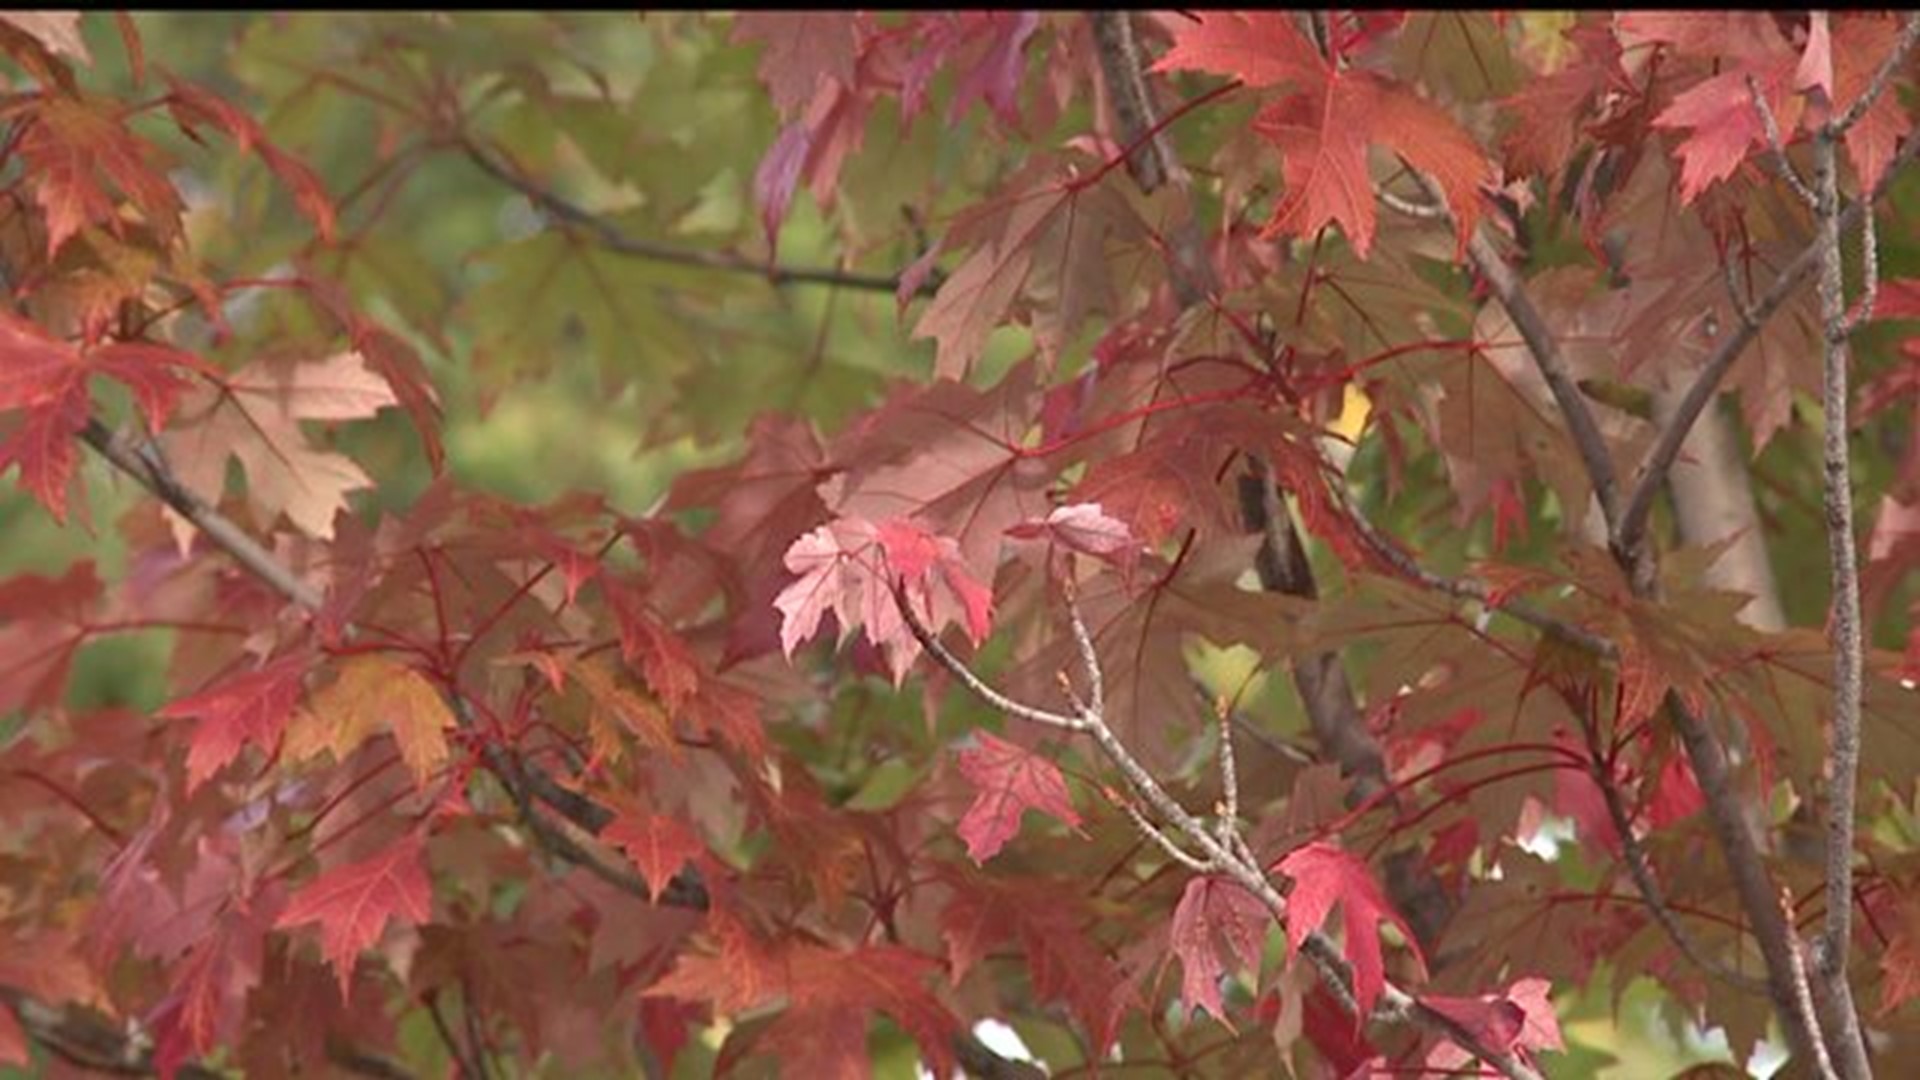 Pennsylvania boasts some of the best fall color with many great spots for fall foliage viewing.